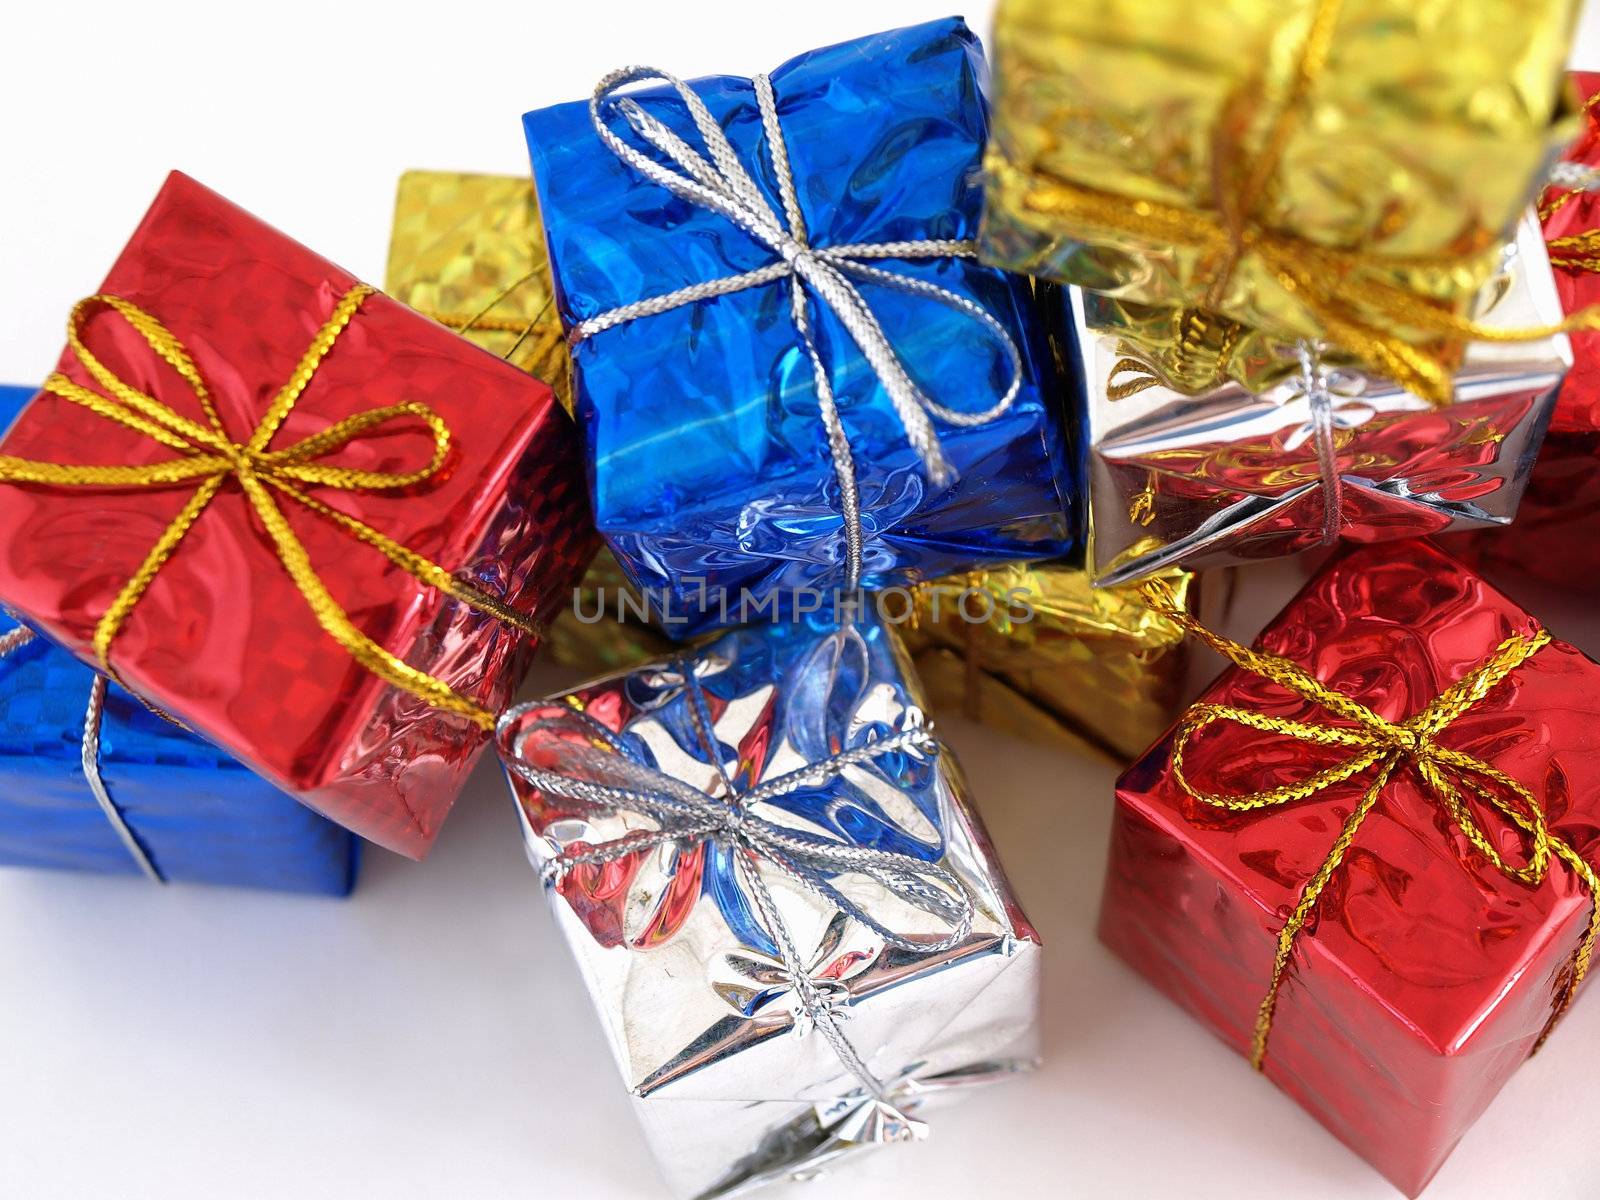 Colorful gift boxes in shiny wrapping paper isolated against a white background.